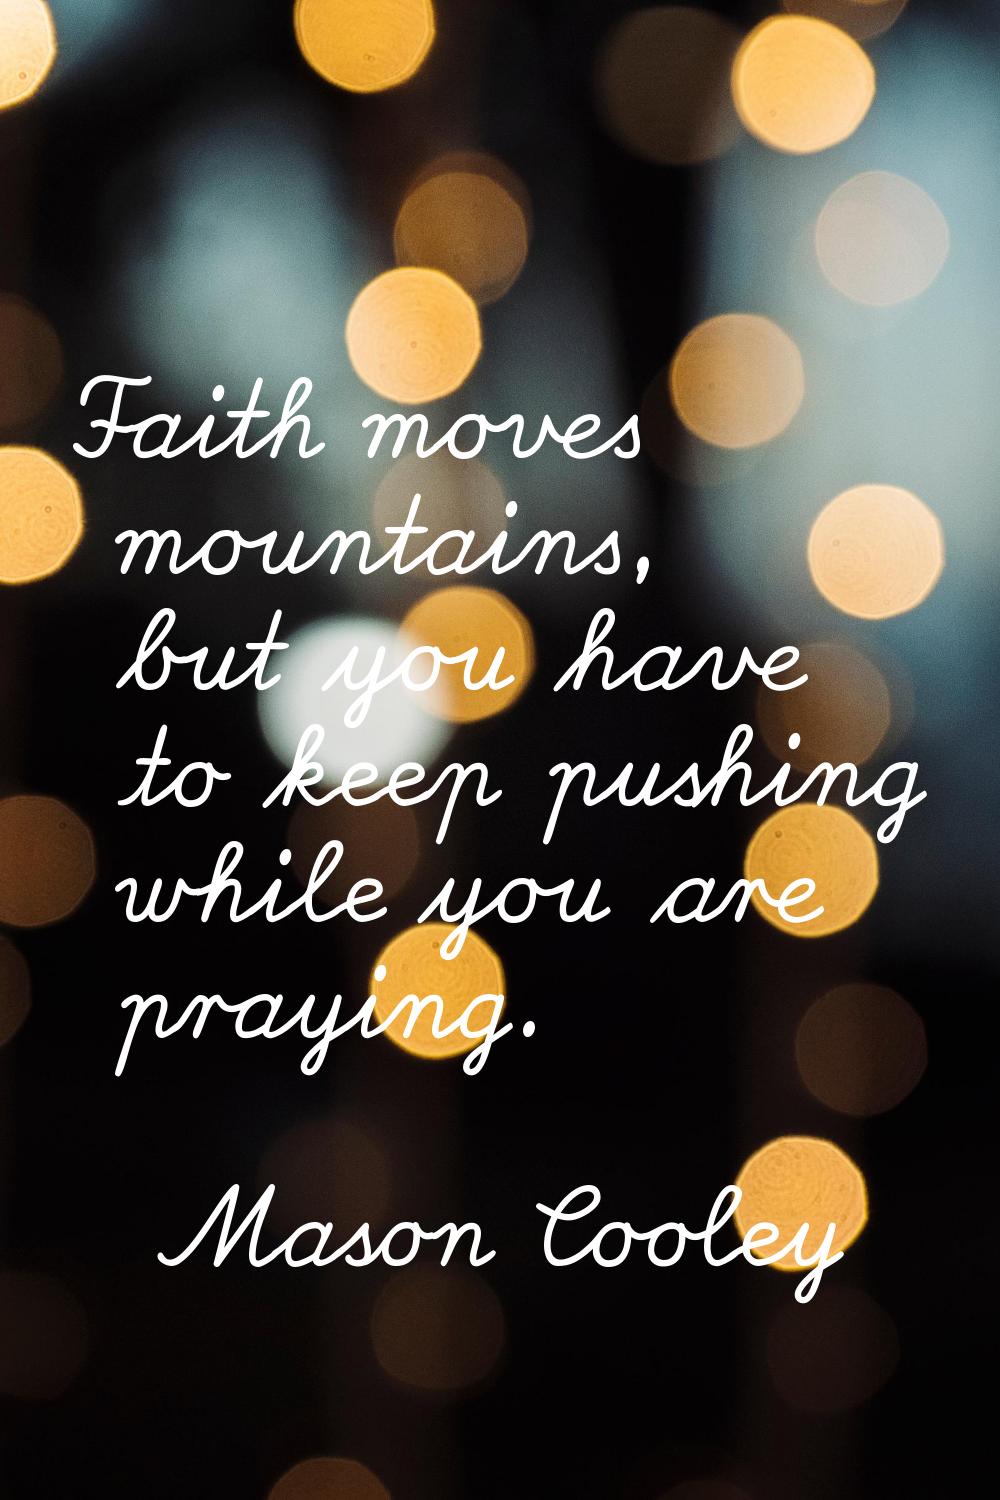 Faith moves mountains, but you have to keep pushing while you are praying.